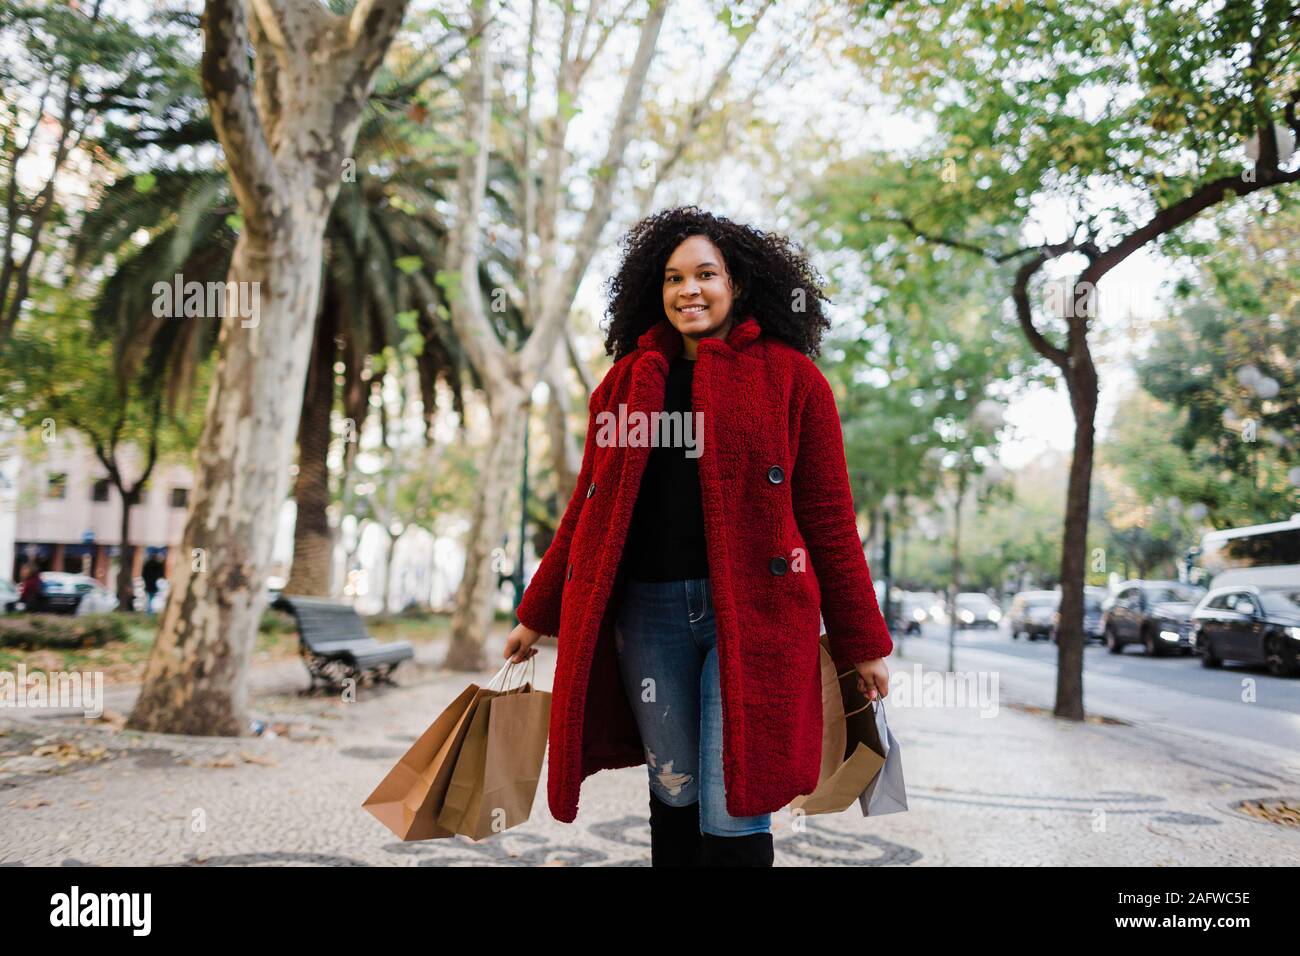 Portrait carefree young woman with shopping bags on urban sidewalk Stock Photo